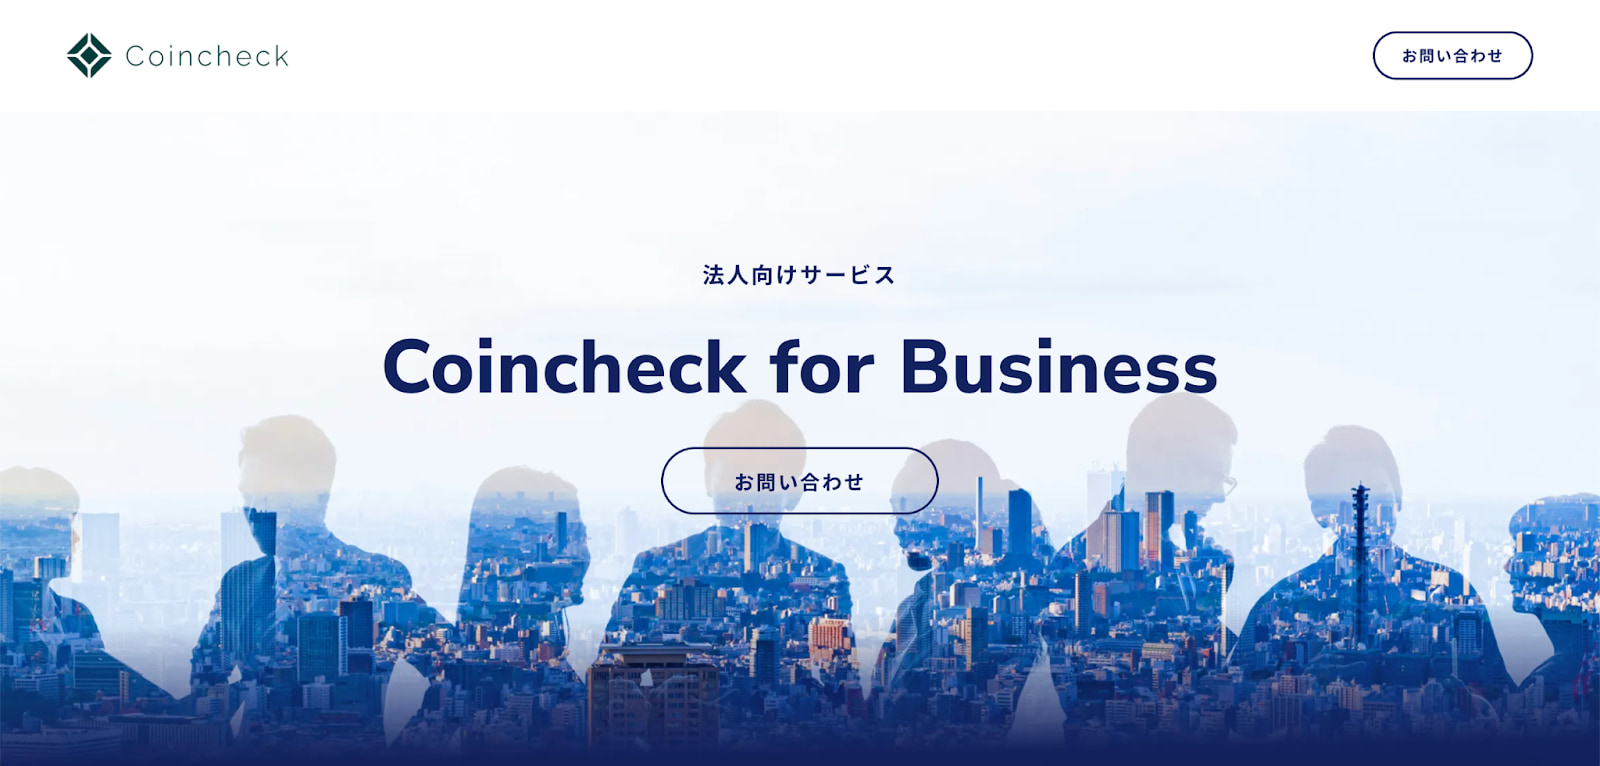 Coincheck for Business